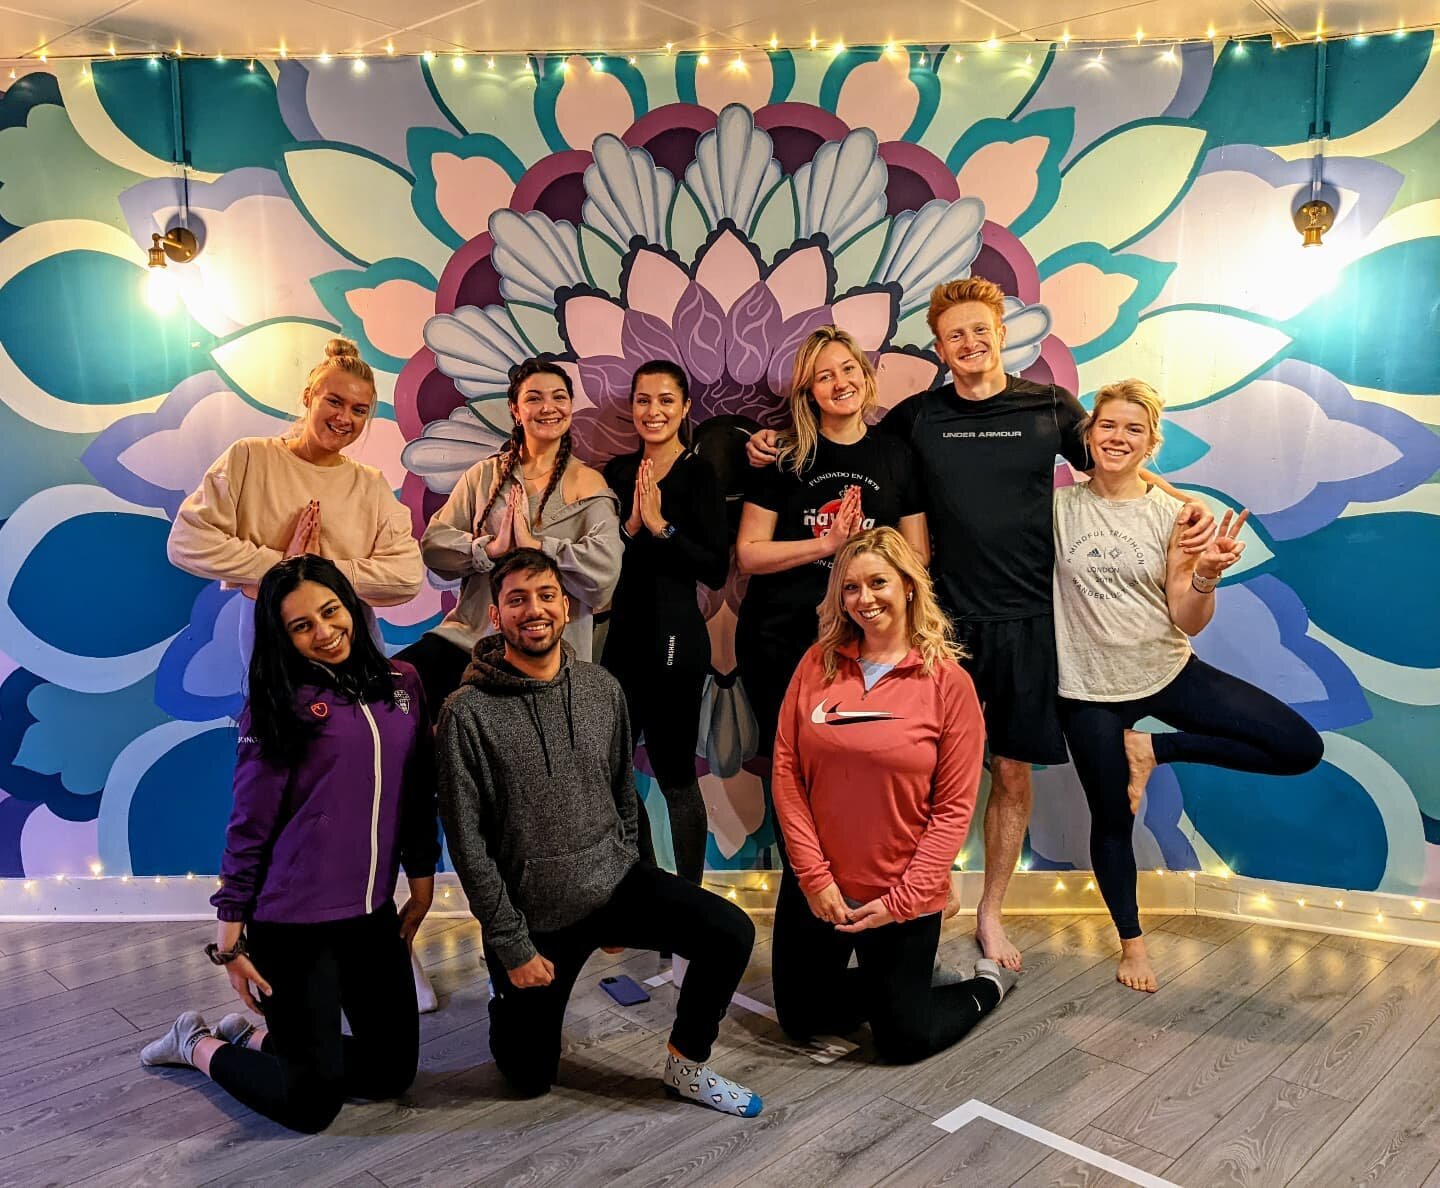 No space for yoga in your office?! ⚡⚡⚡ NO PROBLEM ⚡⚡⚡ we can find you a studio to use, close to your offices! 

First time clients @parkavenuerec wanted to run a #WellnessWednesday Yoga class but didn't have the space in the office, and noone had mat